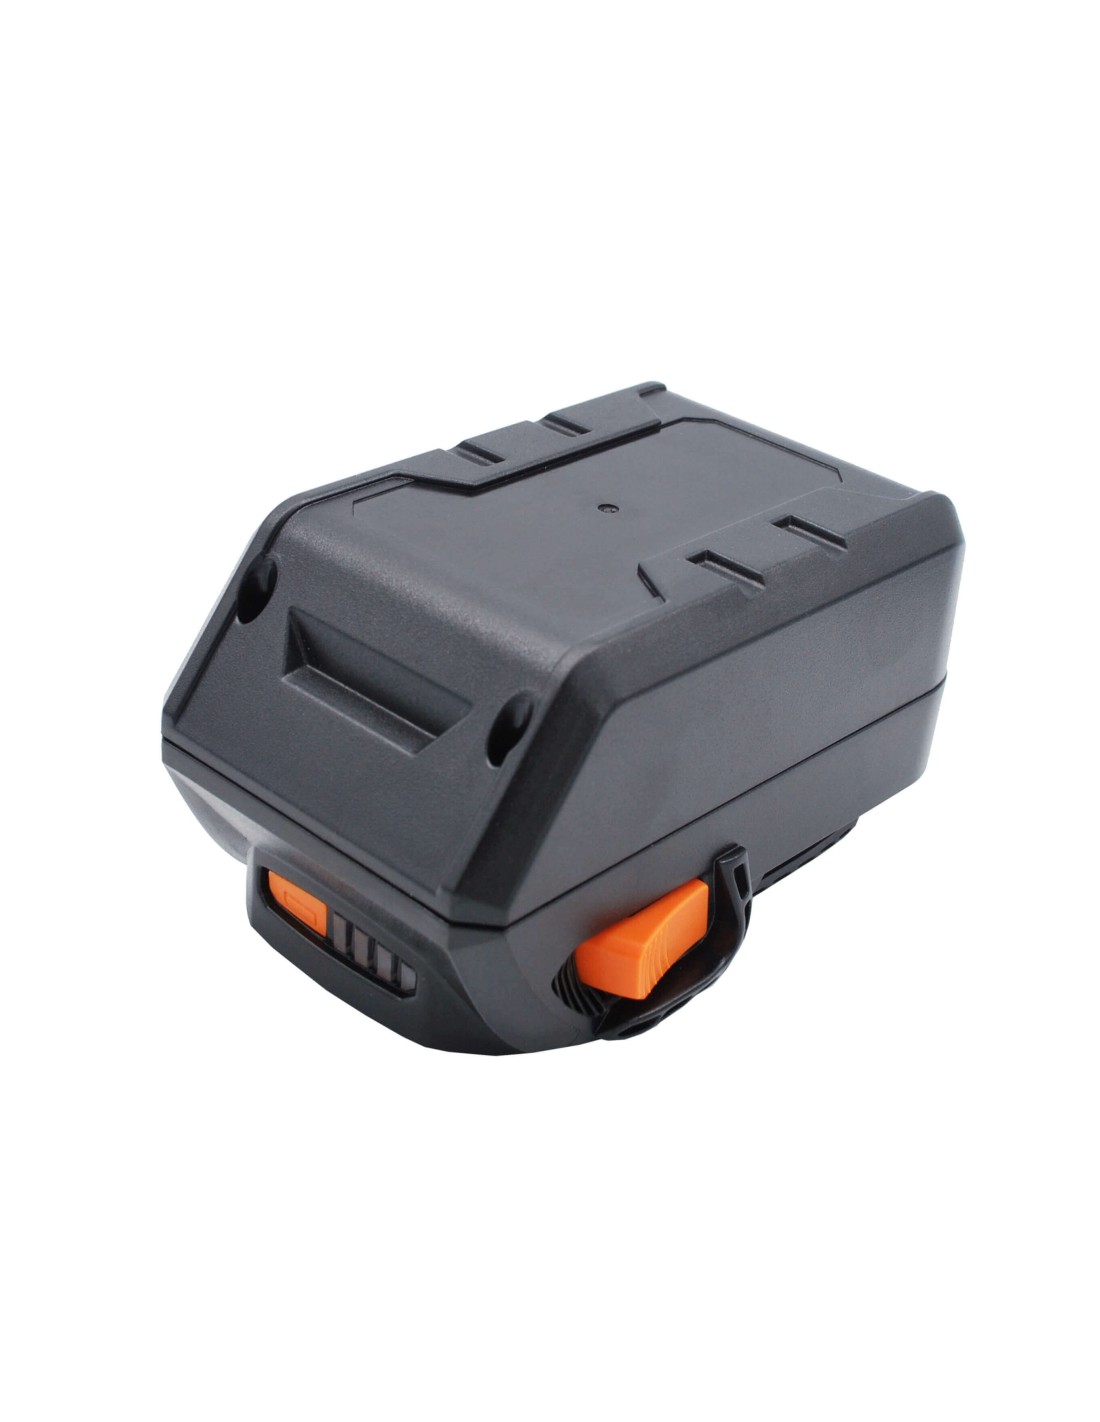 Battery for Ridgid 130383001, 130383025 2000mAh replaces Ac840084